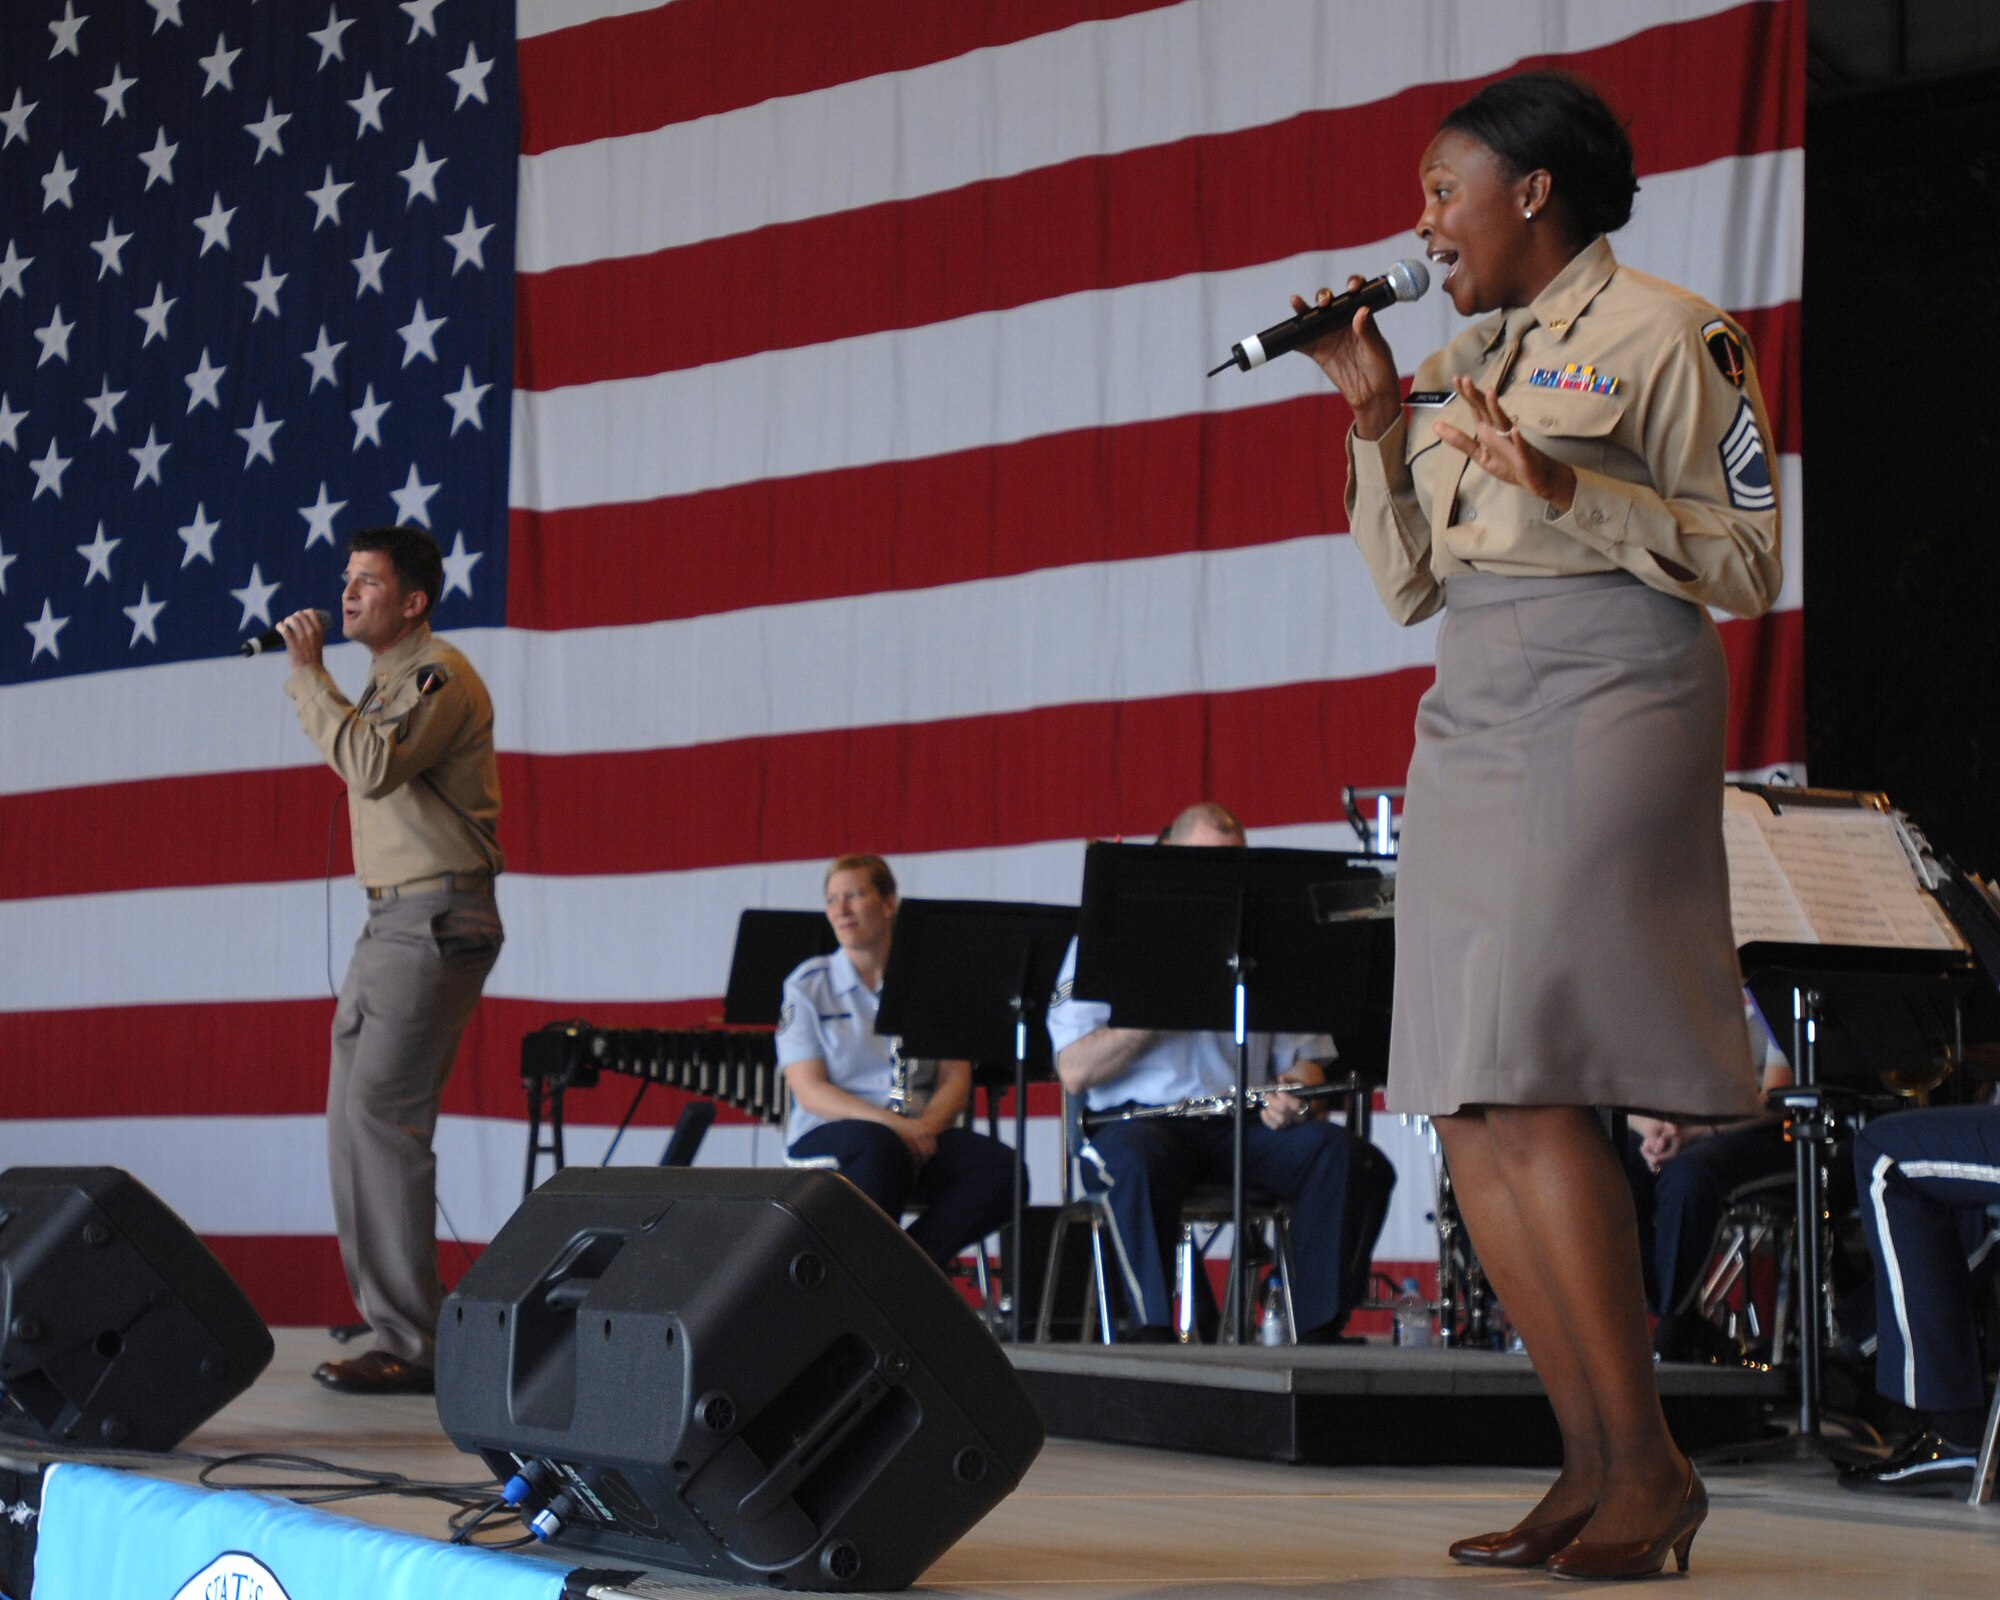 Staff Sgt. Keisha Gwin-Goodin and Staff Sgt. Craig Bowman, U.S. Air Forces in Europe Band vocalists, dressed in vintage Air Force uniforms to perform for the crowd attending the U.S. Air Forces in Europe 60th Air Force anniversary celebration, August 11, 2007 at Ramstein Air Base, Germany.   (U.S. Air Force photo/Airman 1st Class Kenny Holston)